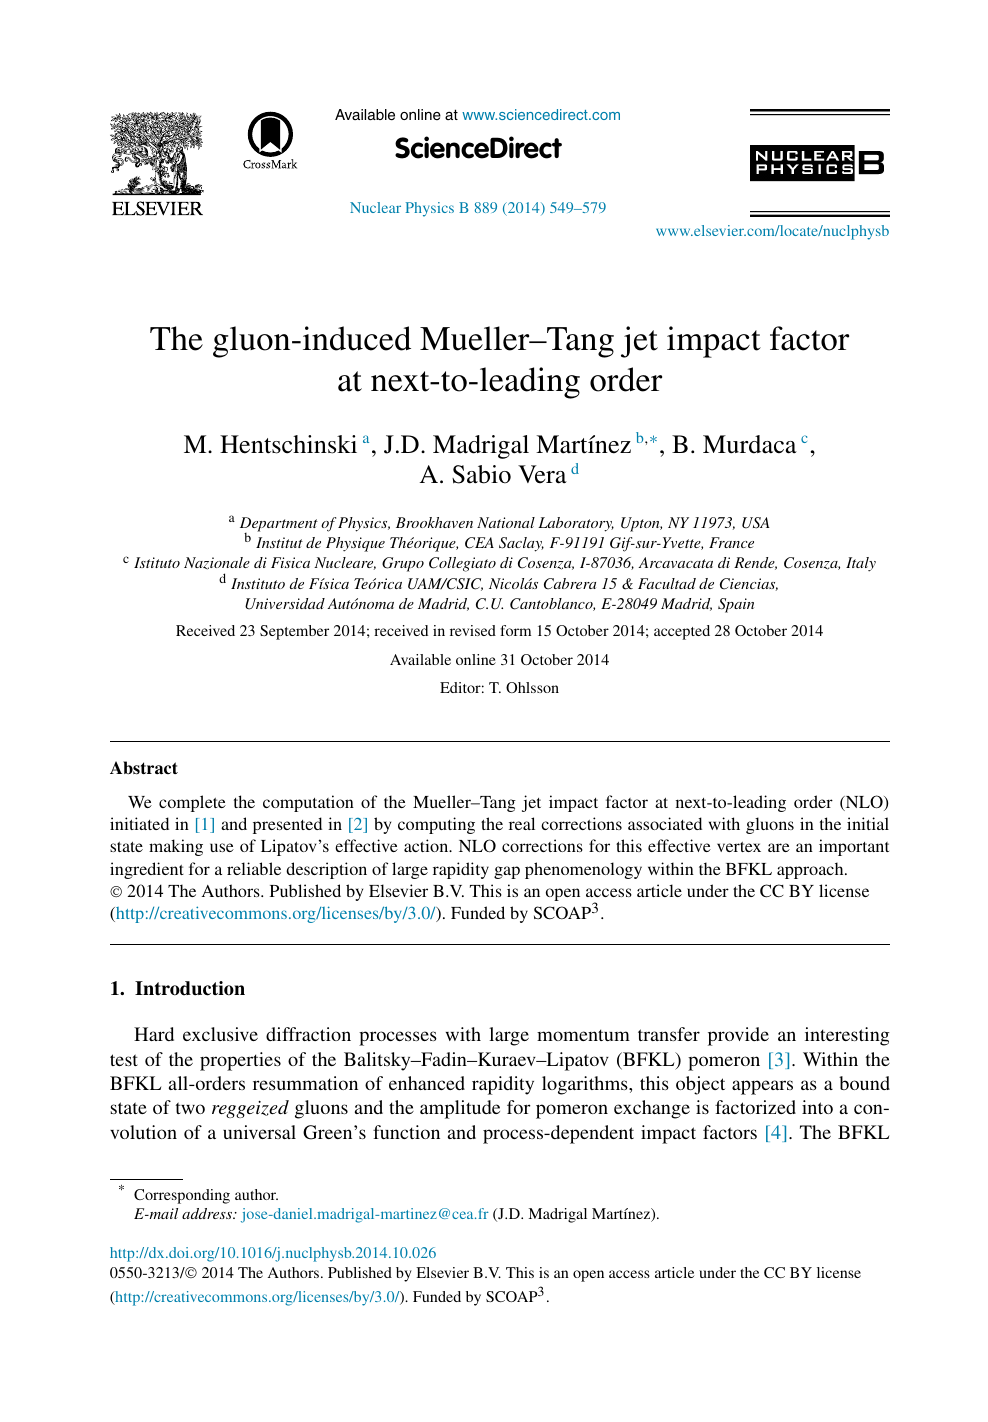 The Gluon Induced Mueller Tang Jet Impact Factor At Next To Leading Order Topic Of Research Paper In Physical Sciences Download Scholarly Article Pdf And Read For Free On Cyberleninka Open Science Hub